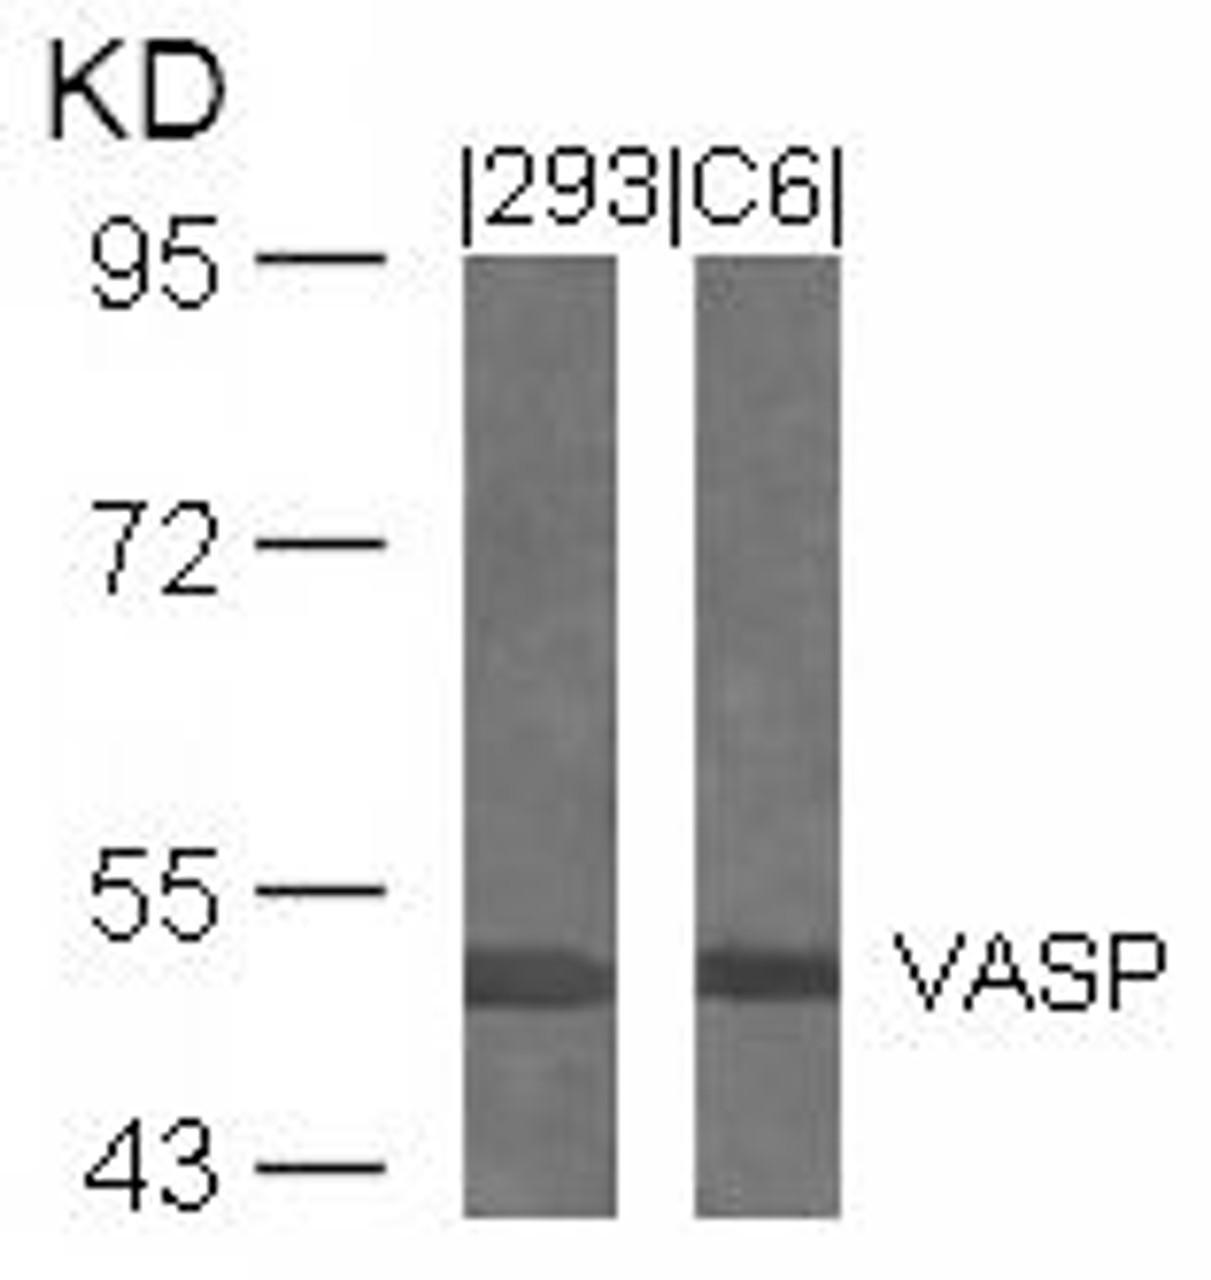 Western blot analysis of lysed extracts from 293 and C6 cells using VASP (Ab-239) .